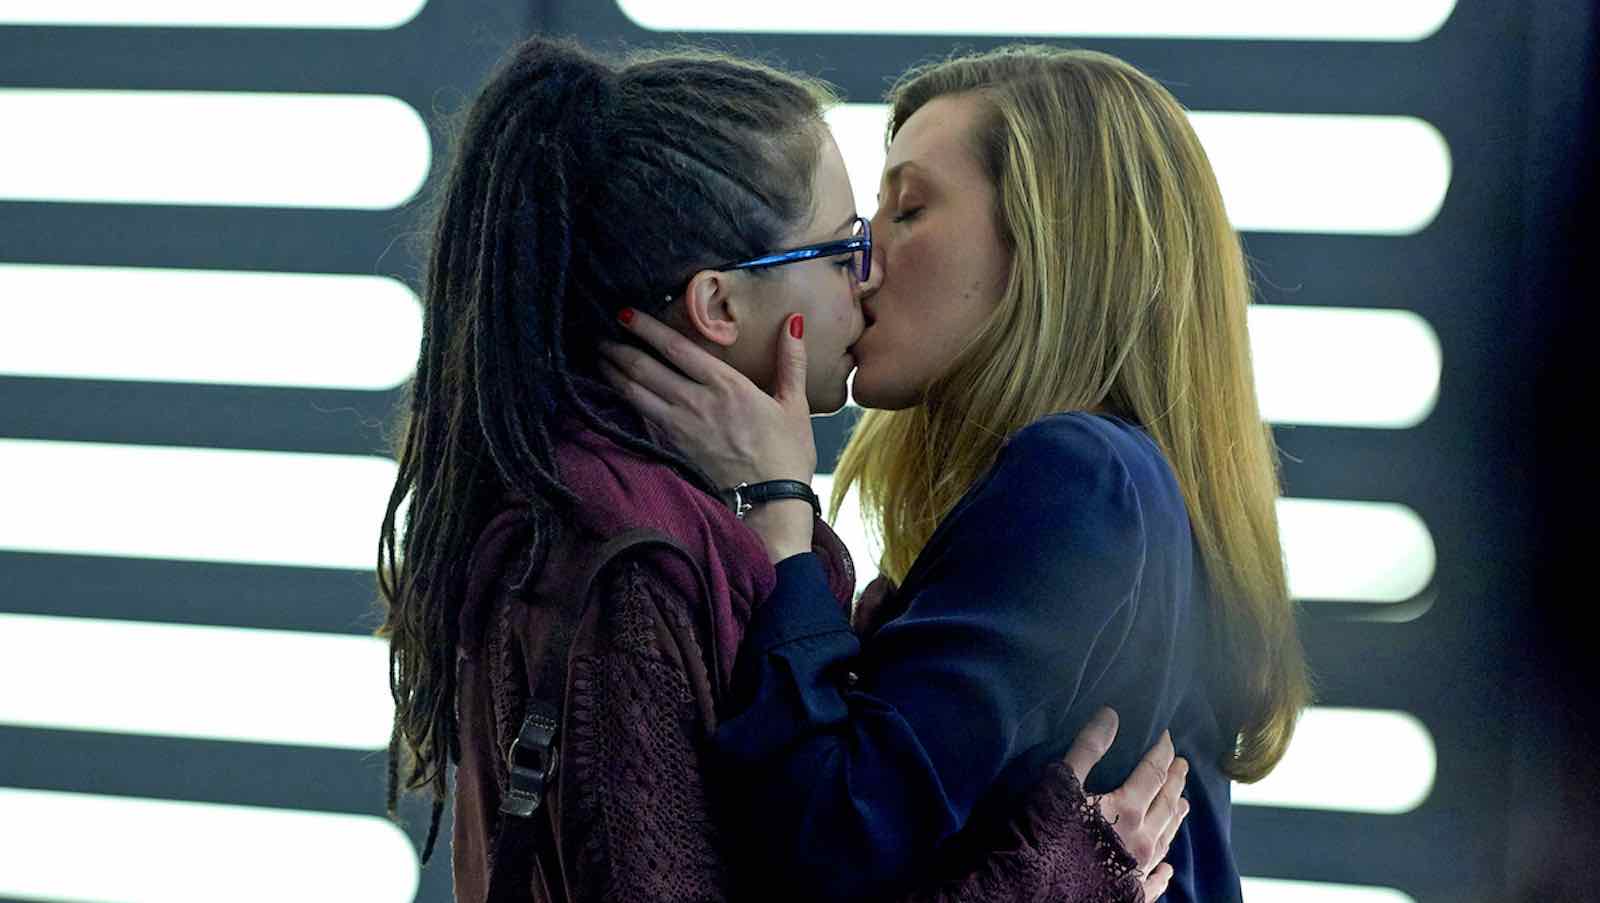 Lgbtq Sex Scenes All The Badass Lesbian Power Couples On Tv – Film Daily